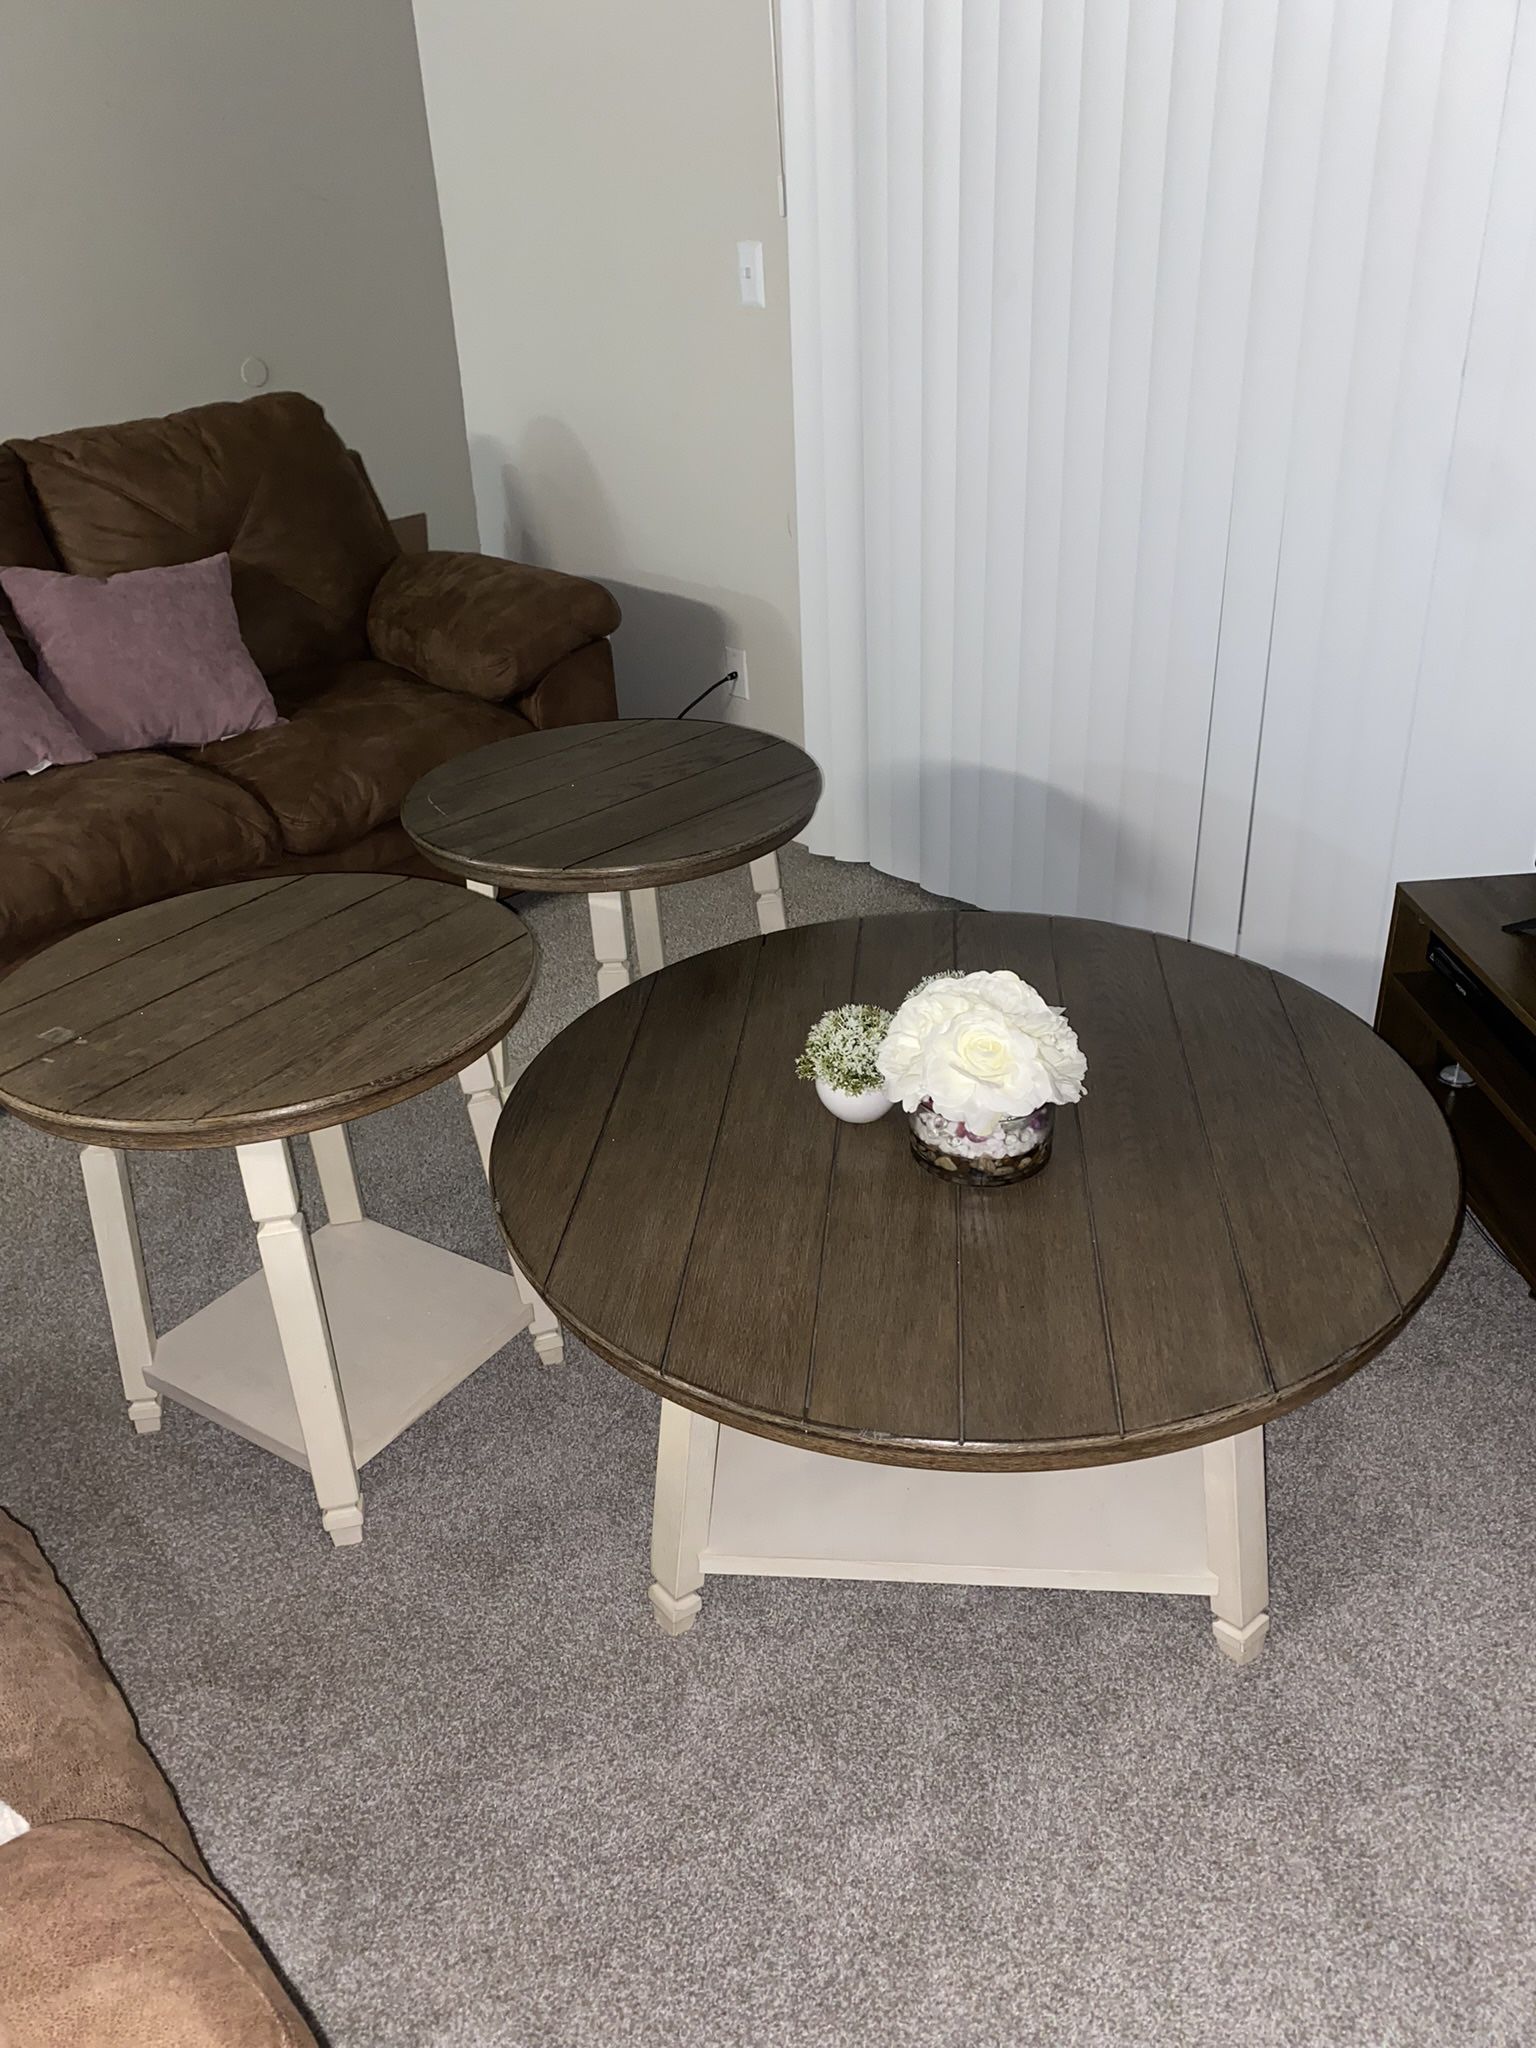 MUST SELL!!  $75 Beautiful Farm House Style Coffee Table and 2 Side Tables